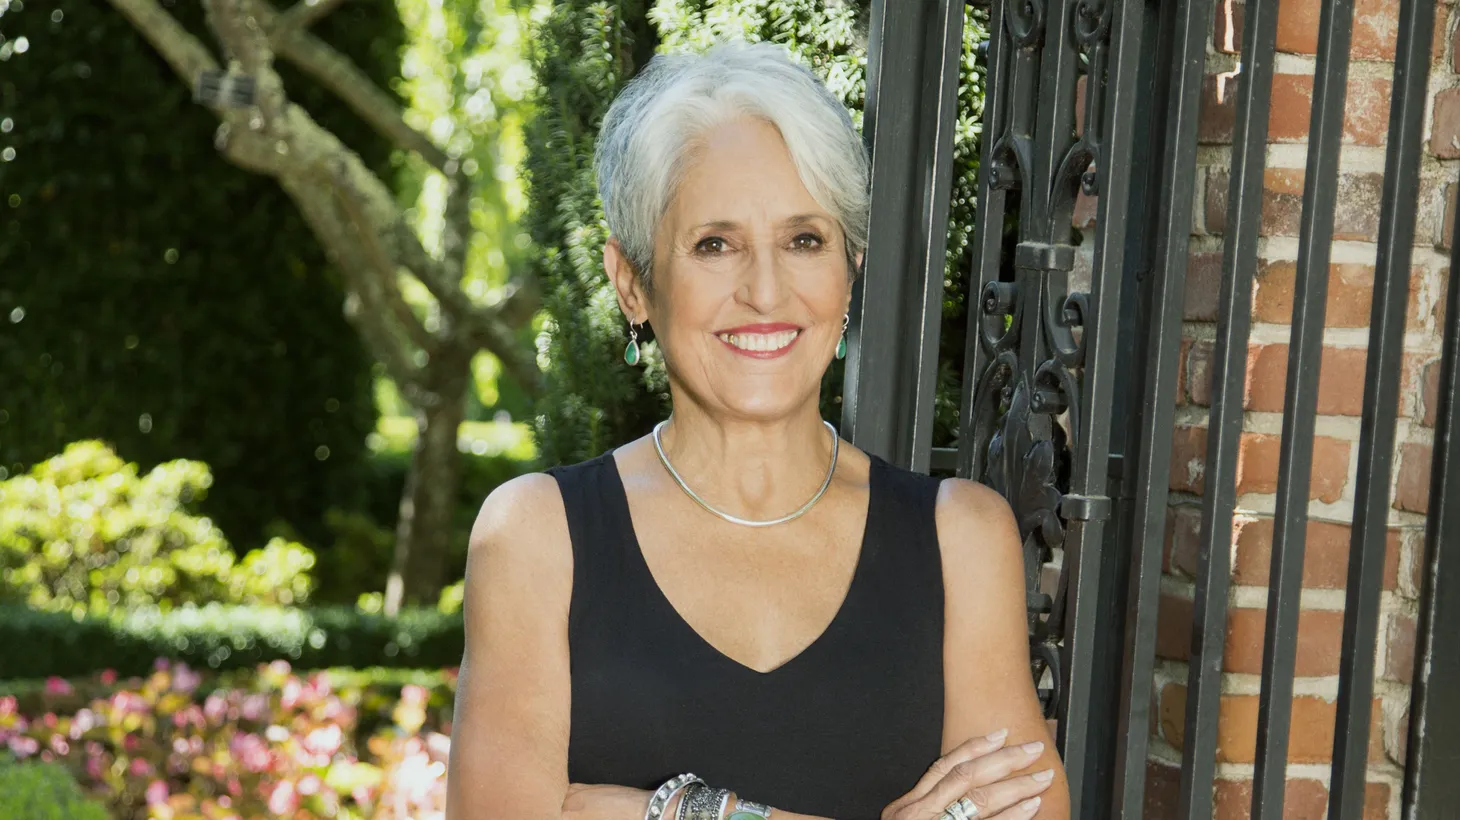 After Joan Baez retired from music touring in 2019, she turned to painting, drawing, and publishing books.